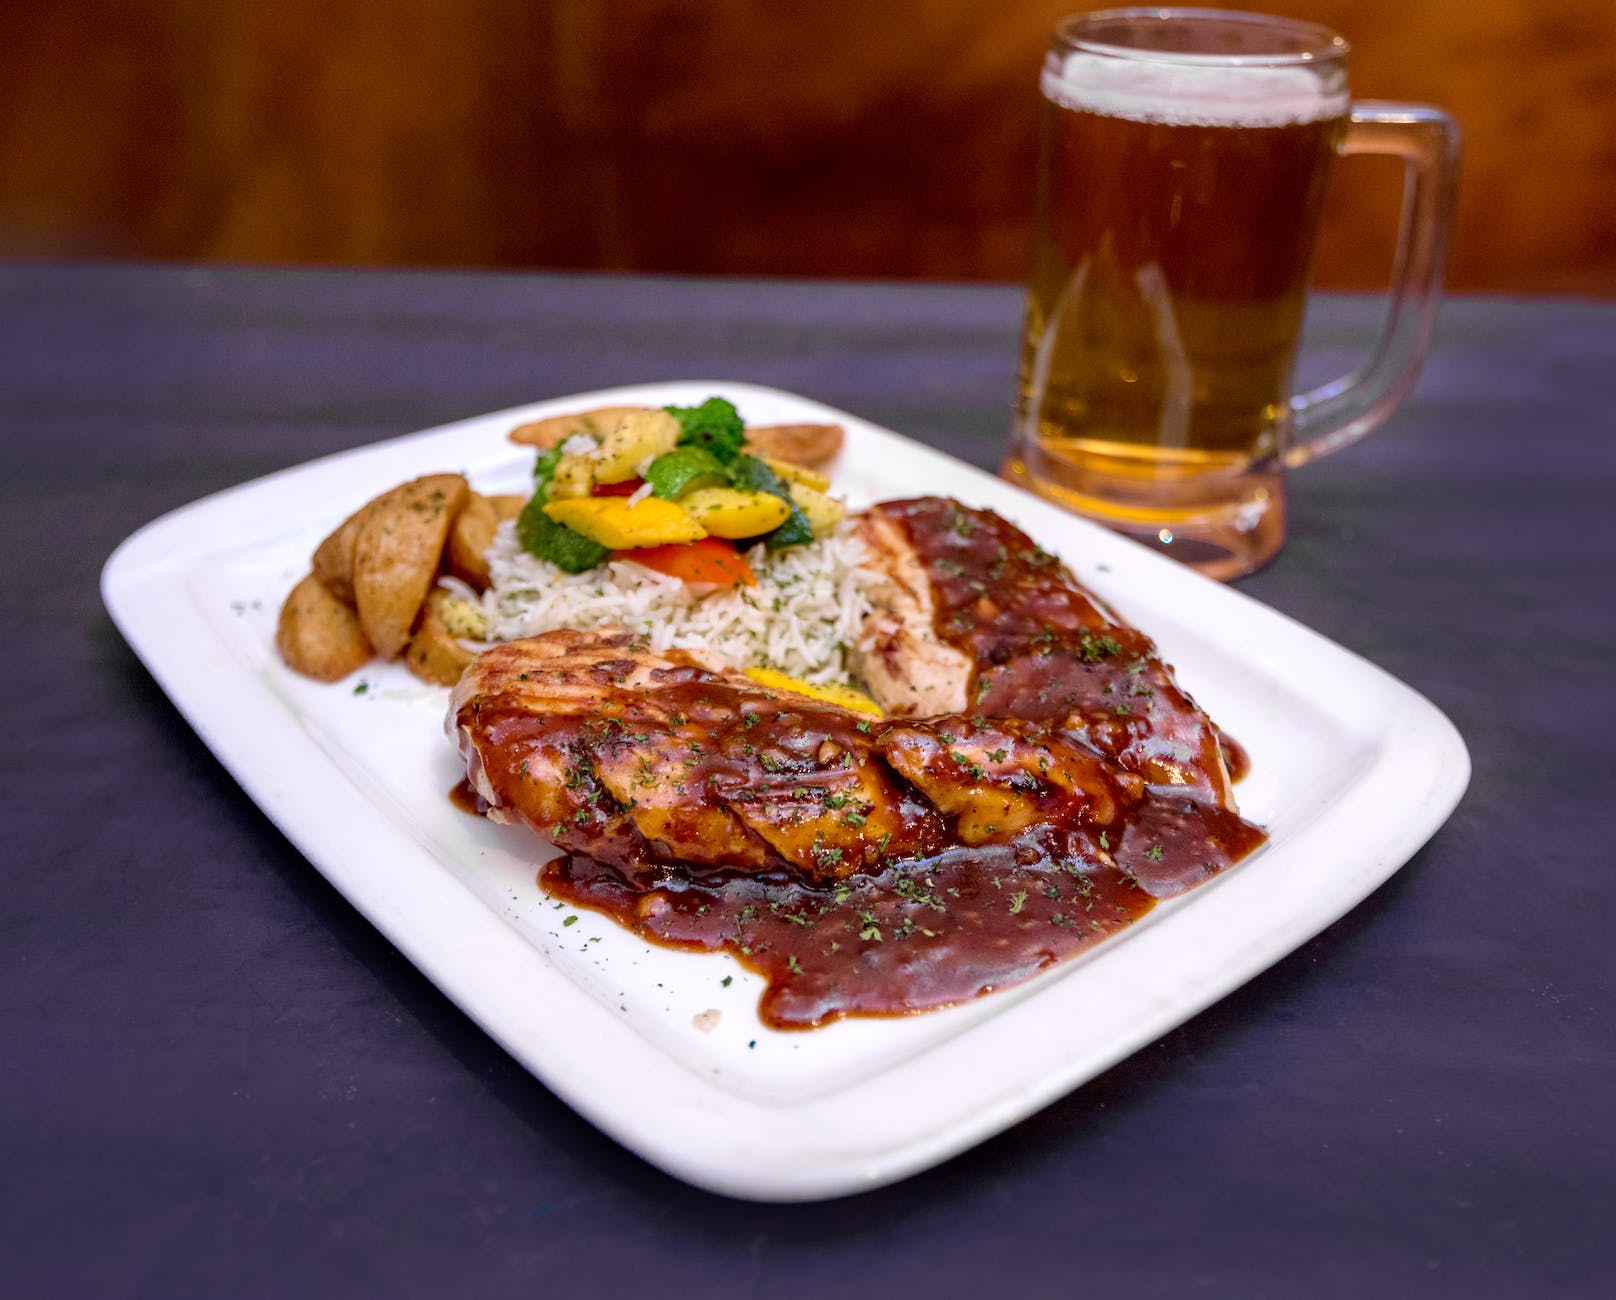 delicious roasted meat steak with potatoes and glass of beer